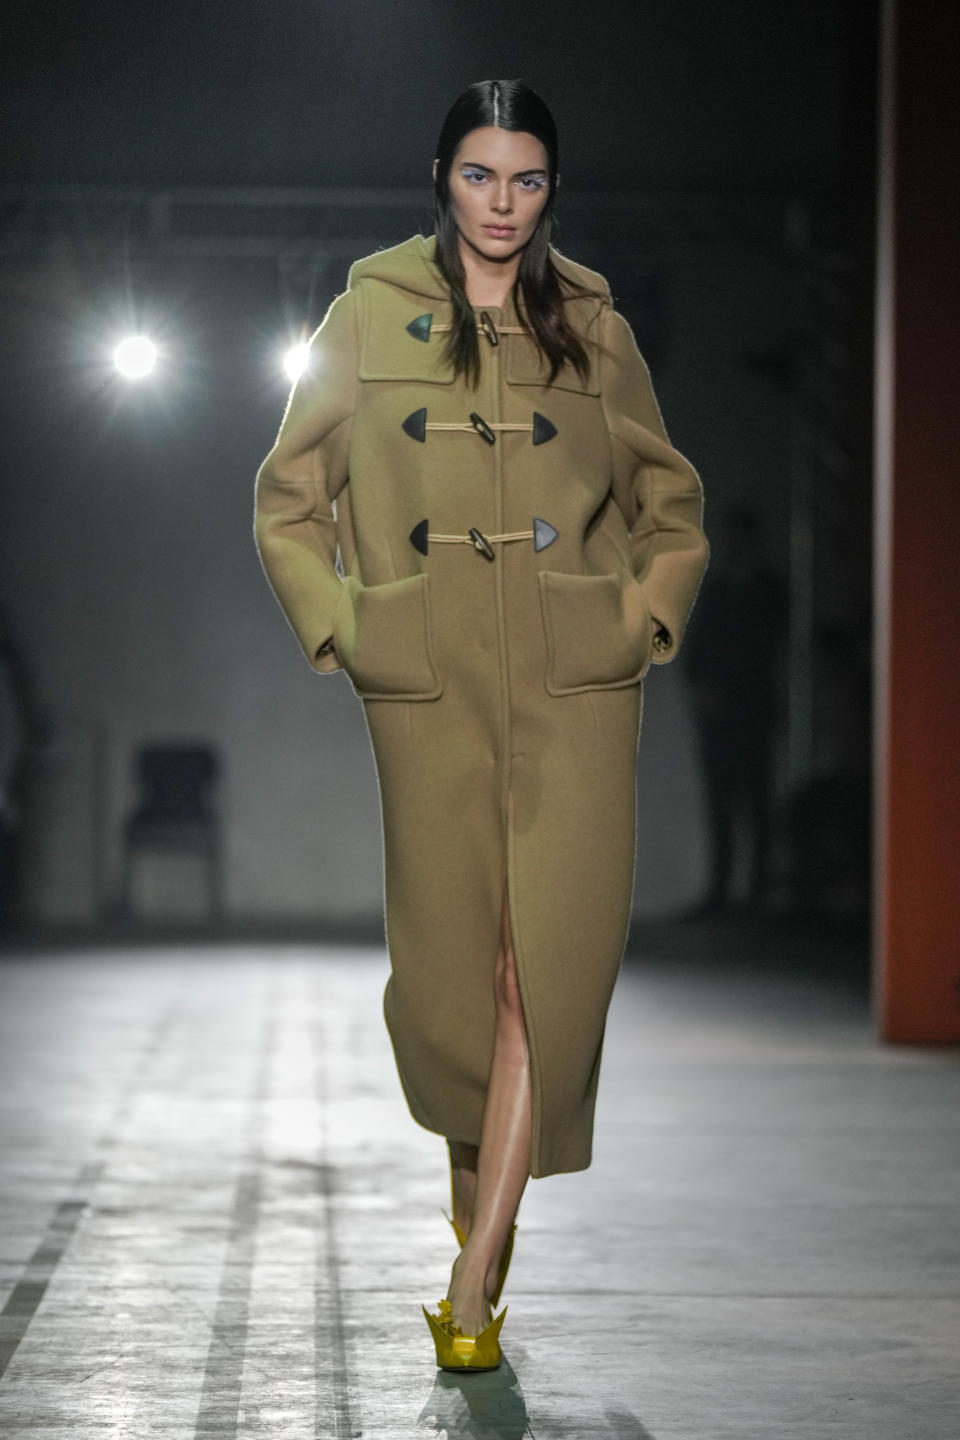 Kendall Jenner wears a creation as part of the Prada women's Fall-Winter 2023-24 collection presented in Milan, Italy, Thursday, Feb. 23, 2023. (AP Photo/Luca Bruno)